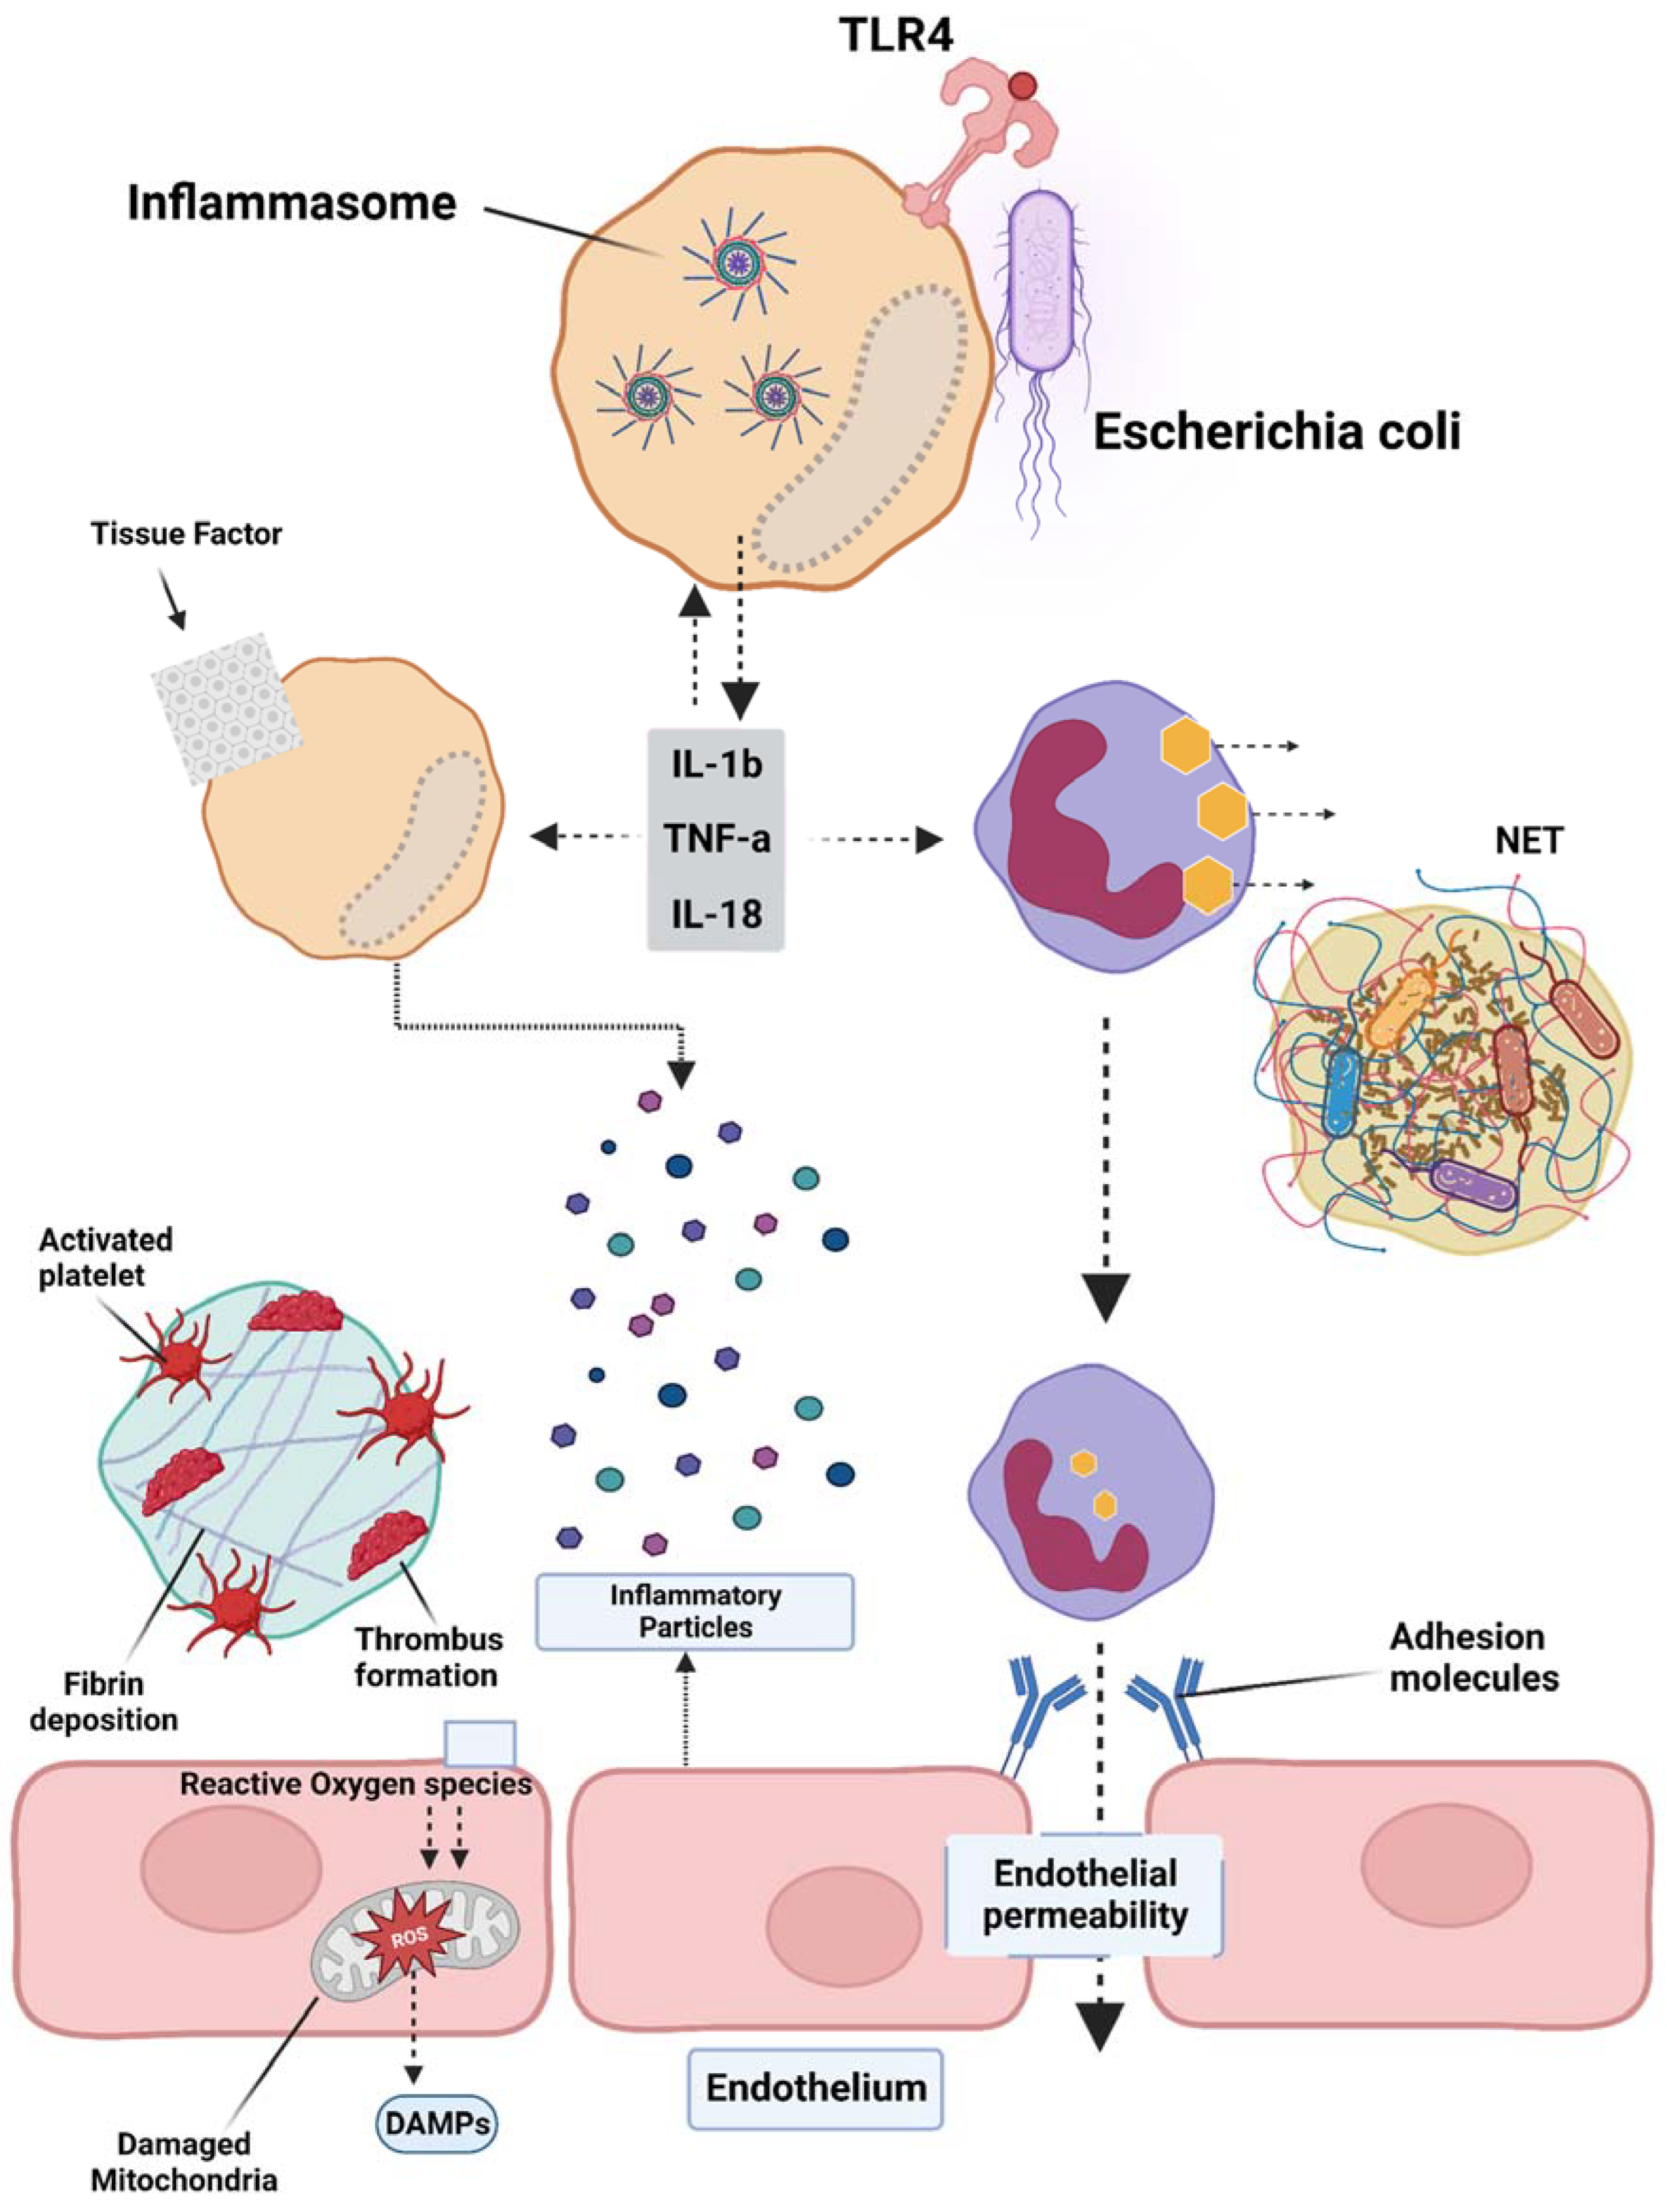 Full article: Platelets after burn injury – hemostasis and beyond